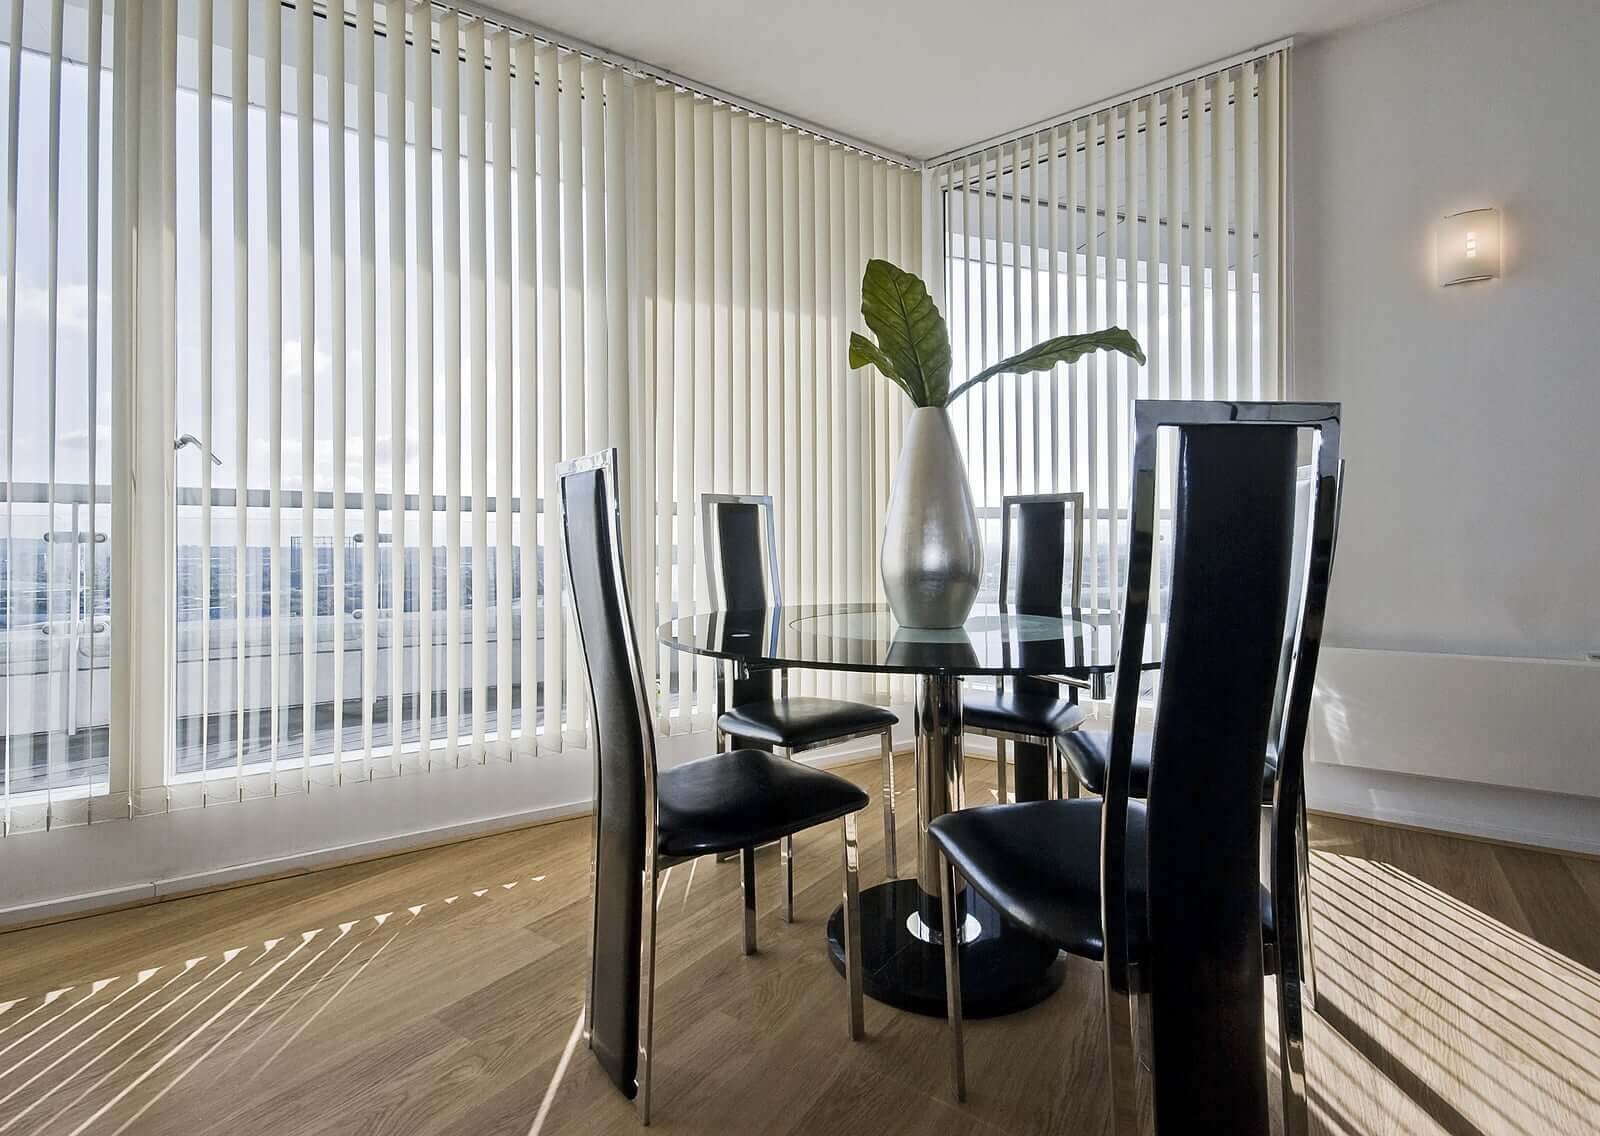 Stylish vertical blinds installed in a dining room